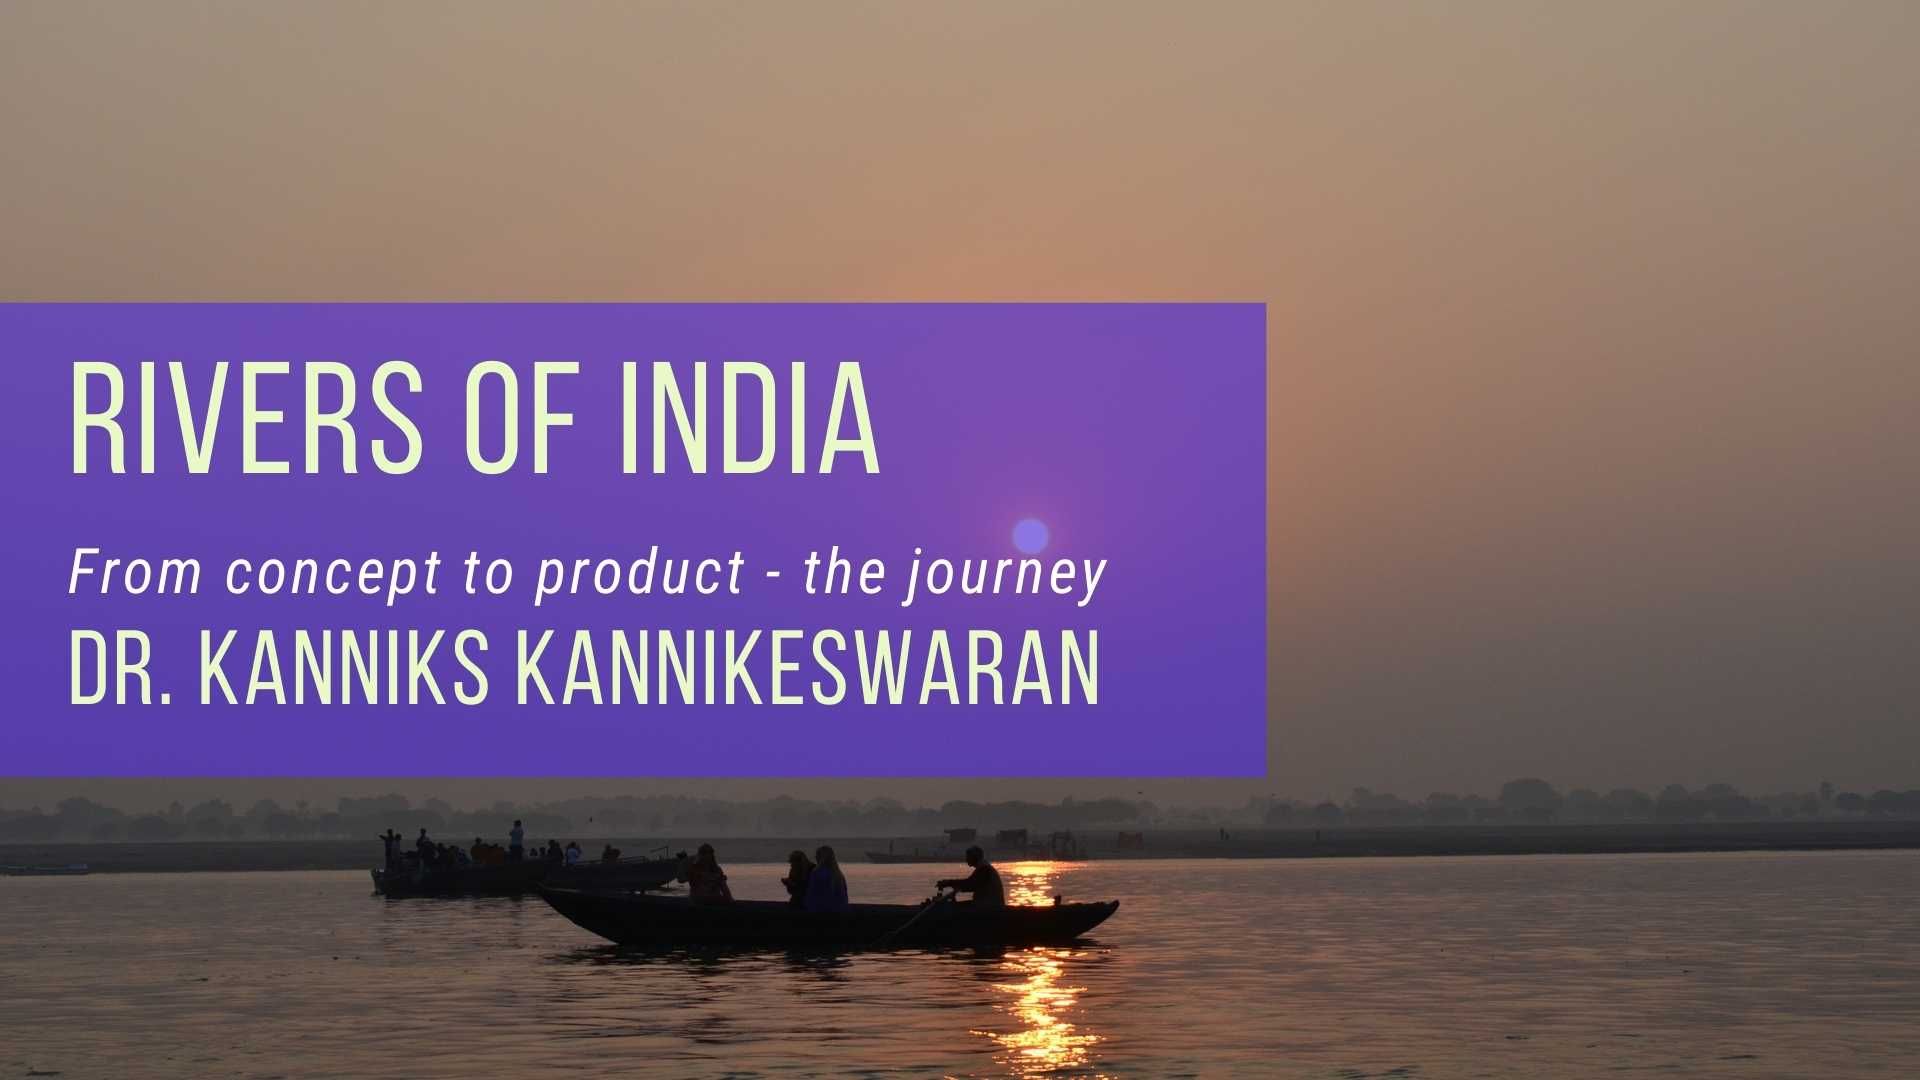 Dr. Kanniks Kannikeswaran explains in a riveting manner how this musical on Rivers of India came about. Written by him in Sanskrit, Dr. Kanniks explains how he chose the ragas and the sequencing of the river names. All in all, a near-perfect symphony of voices, violins, and visuals. A must-watch!